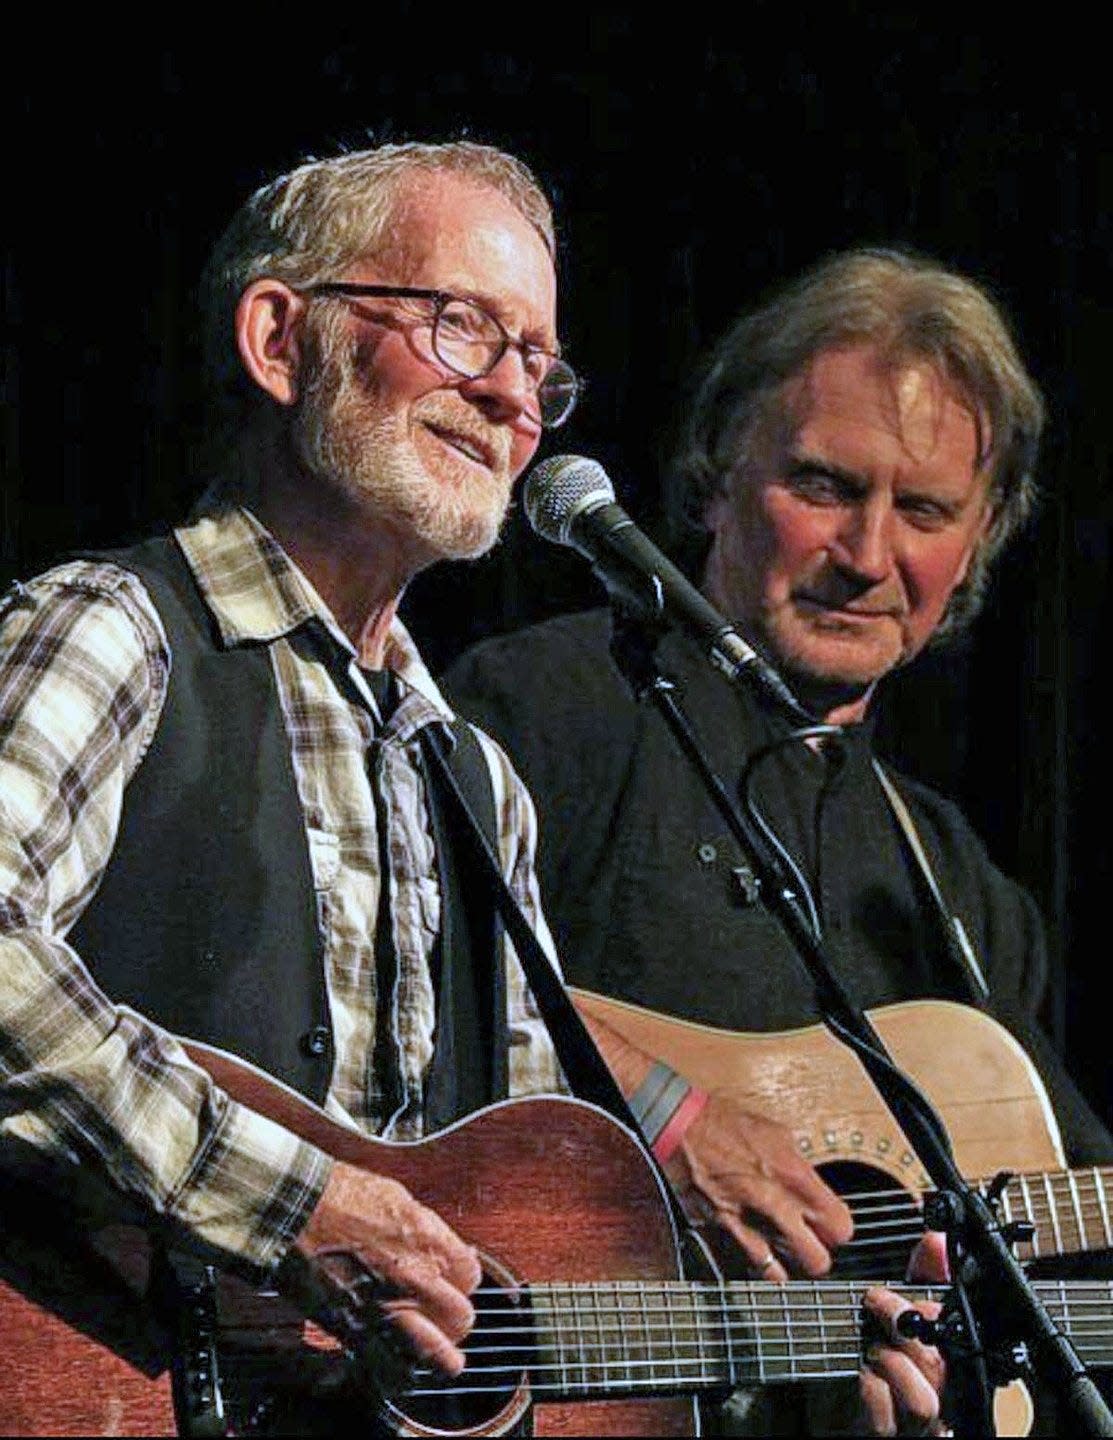 Wisconsin-based folk musicians Johnsmith and Dan Sebranek, from left, are in concert April 12 at White Gull in in Fish Creek with an optional pre-concert dinner.